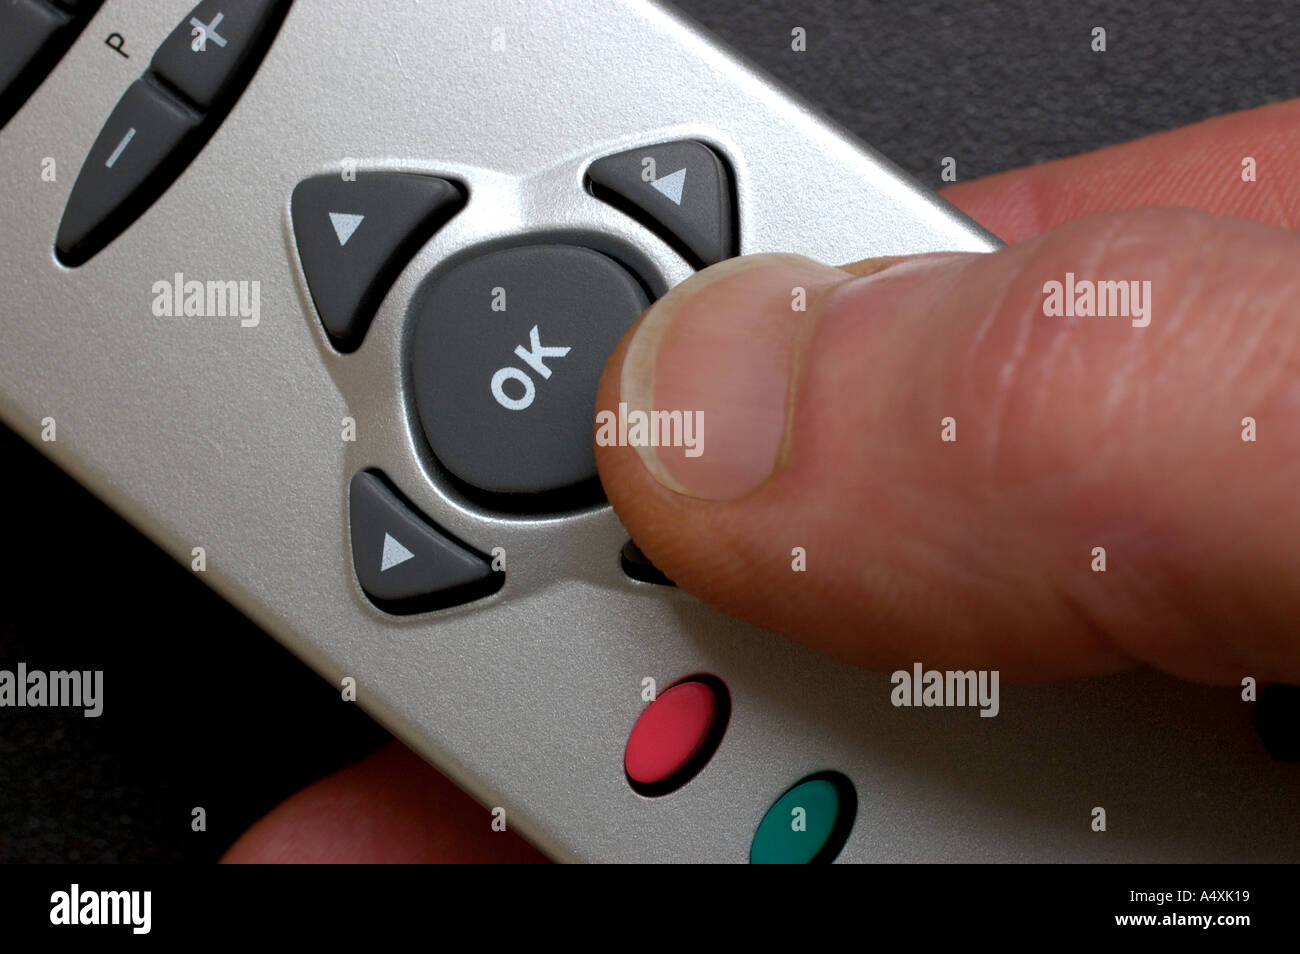 Hand holding remote control thumb pressing ok button Stock Photo